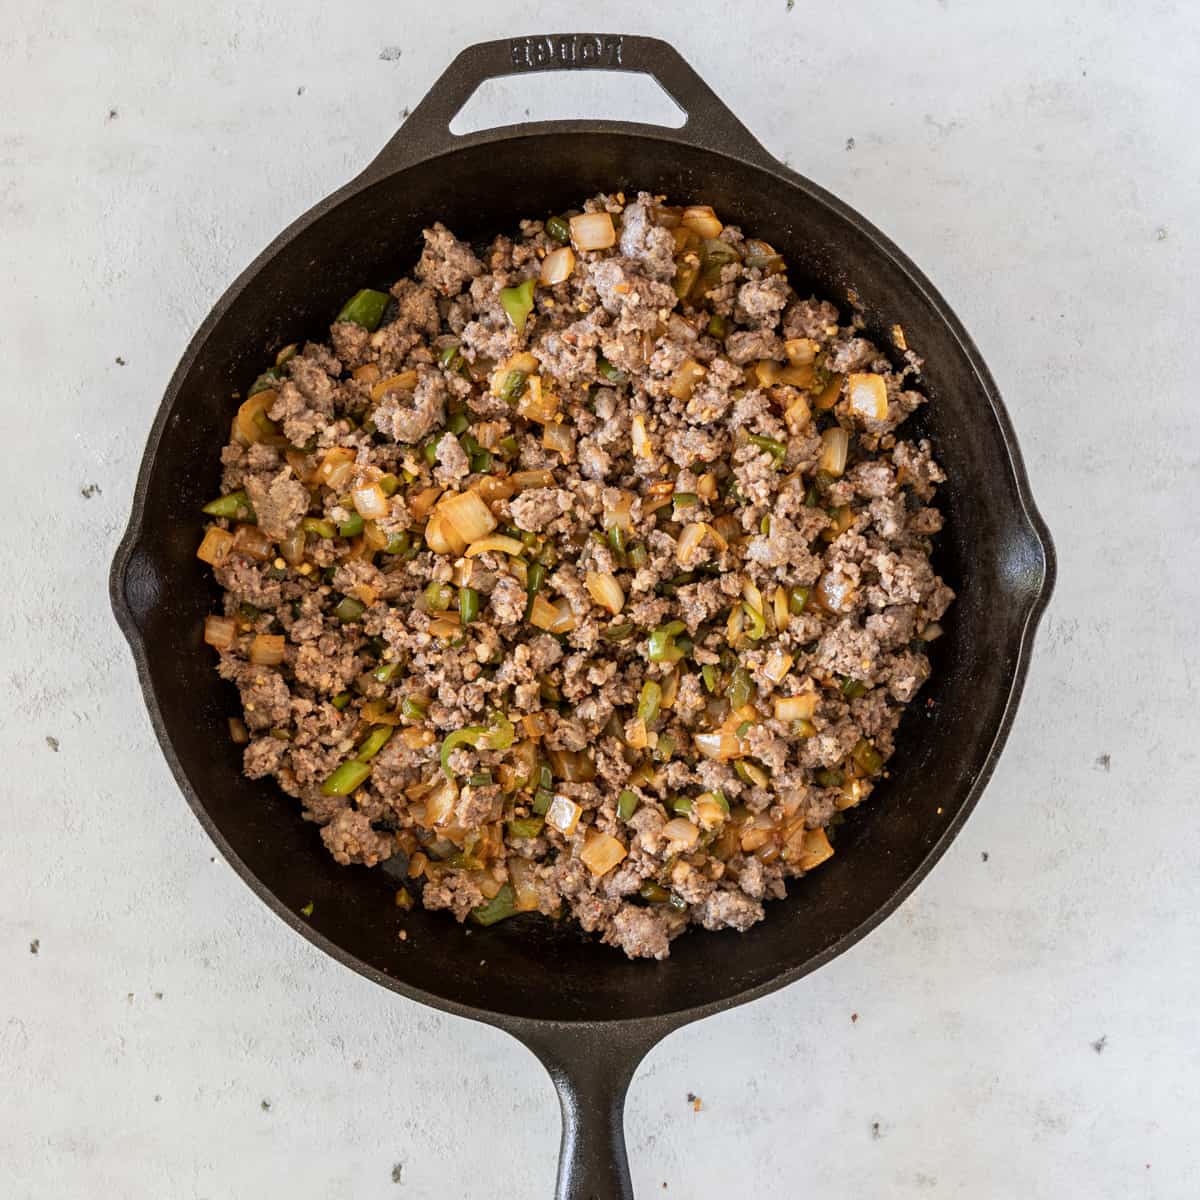 the vegetables and sausage combined in a cast iron skillet on a grey background.